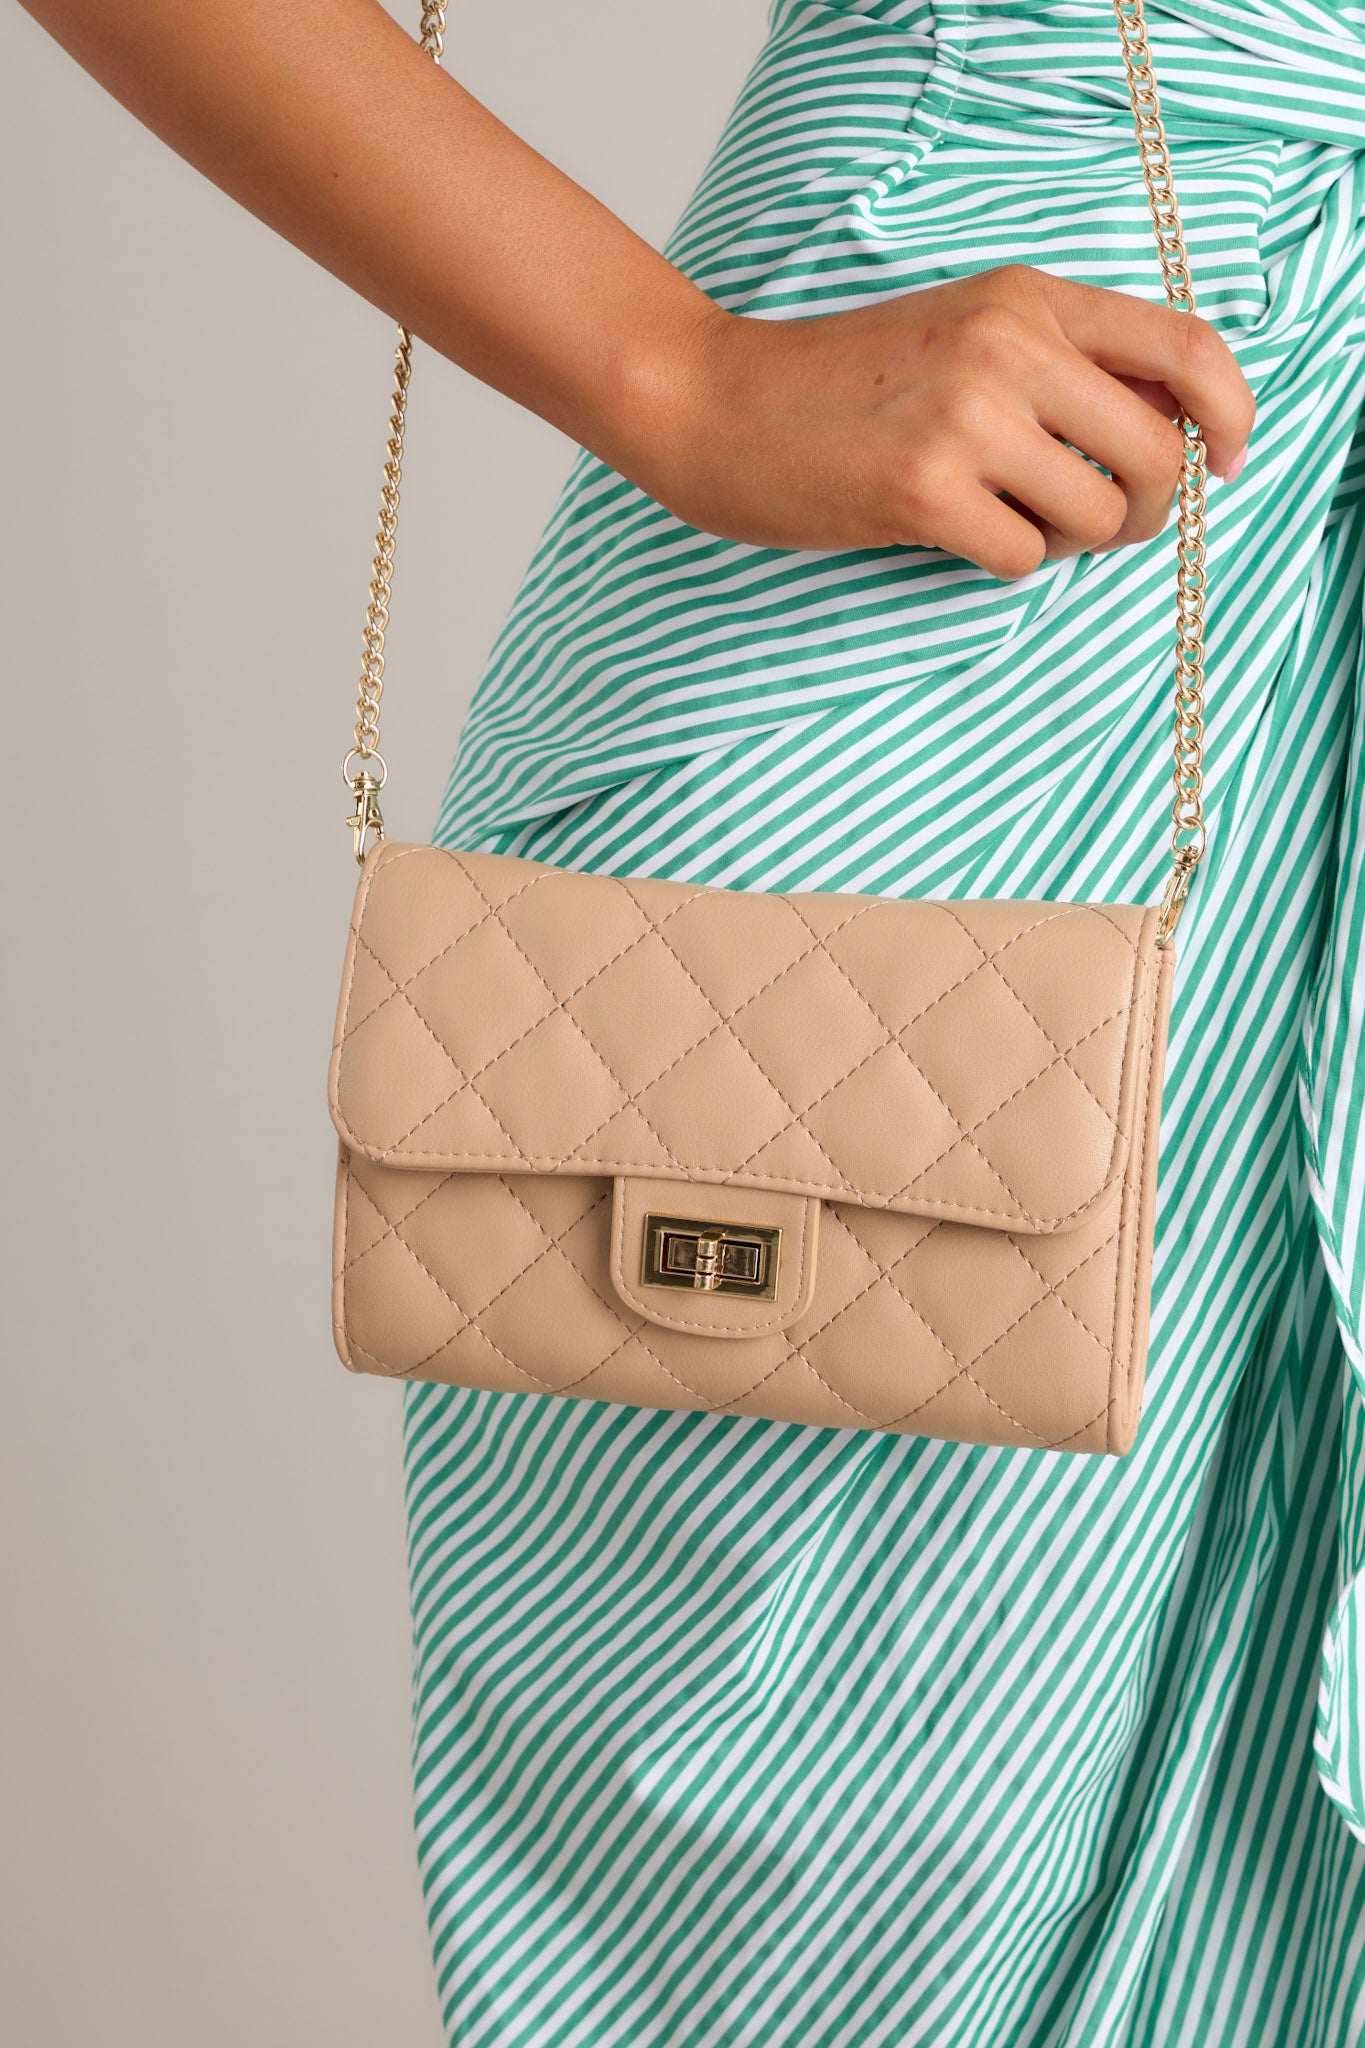 Close-up of a beige quilted crossbody bag with a gold chain strap and a front turn-lock closure.